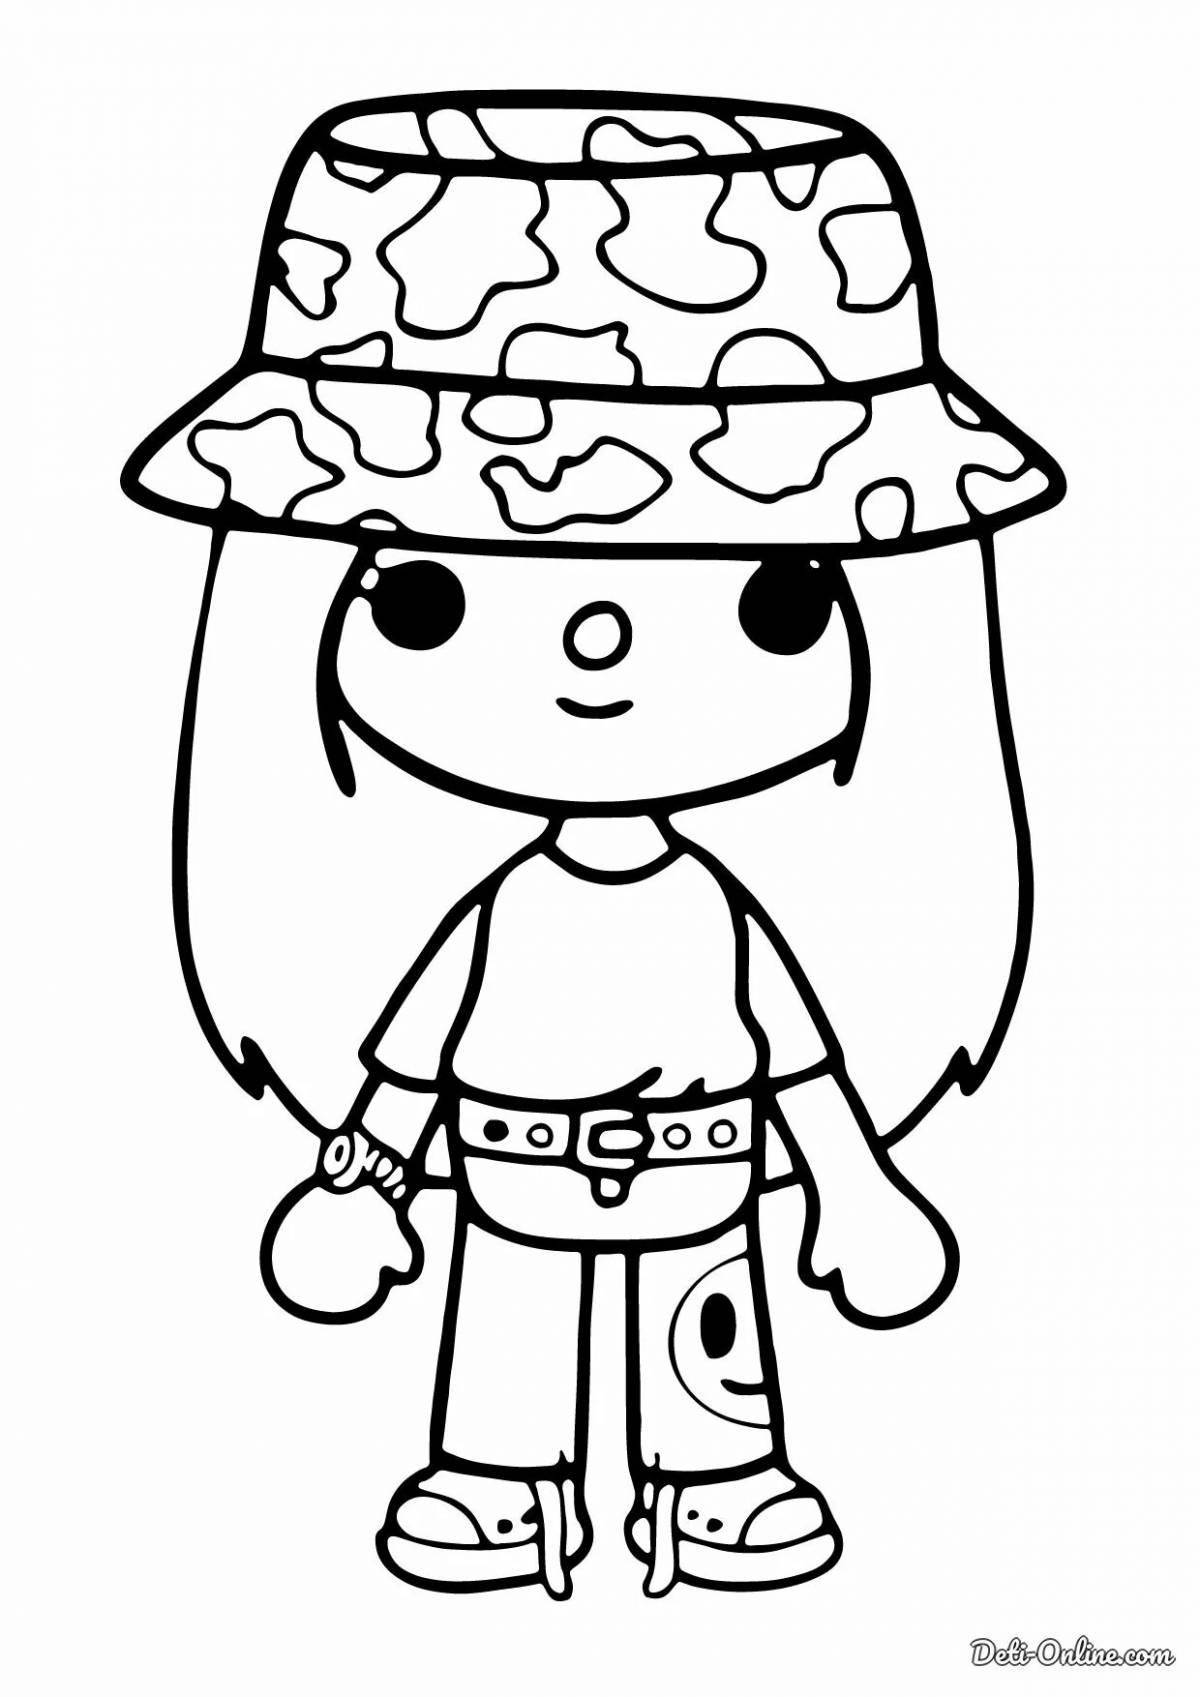 Toko boko's playful clothes coloring page